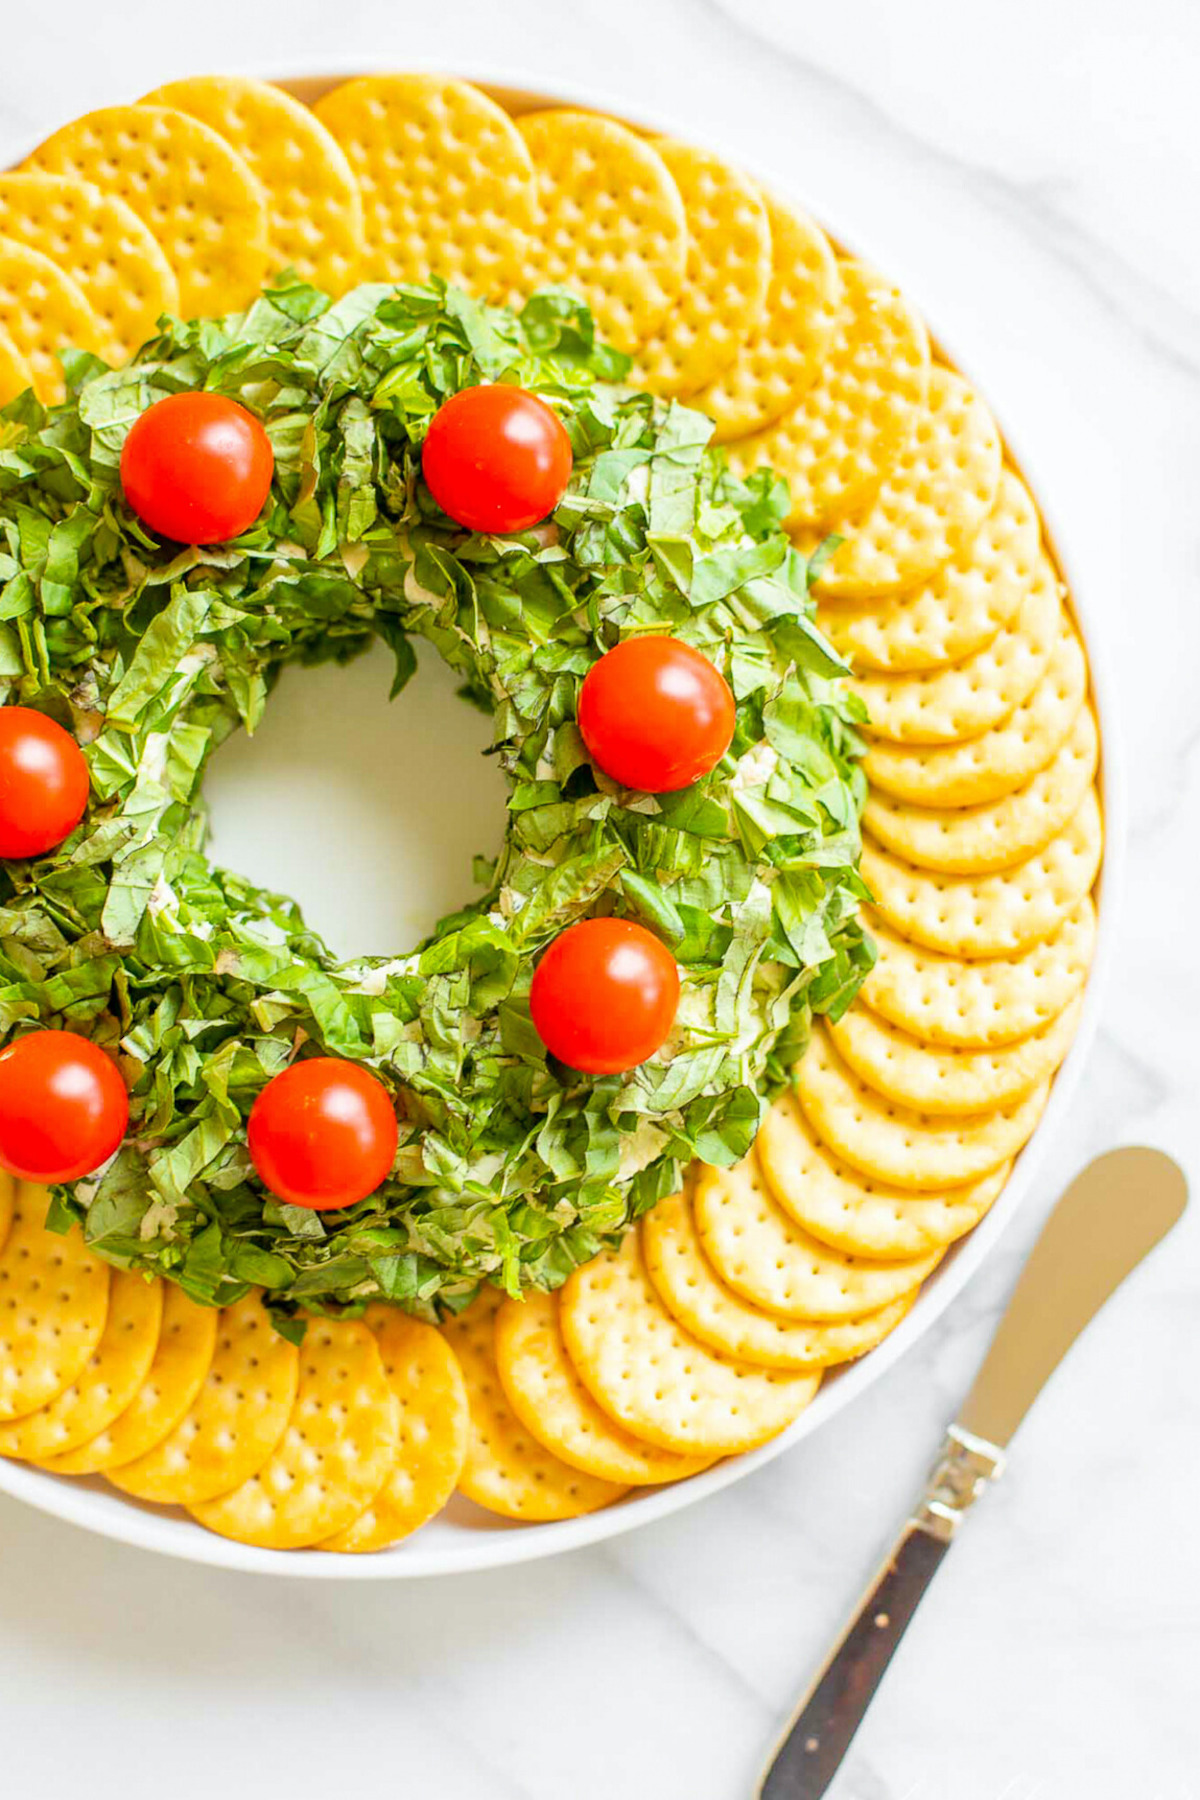 A plate with a wreath of crackers and tomatoes, perfect as Christmas appetizers.